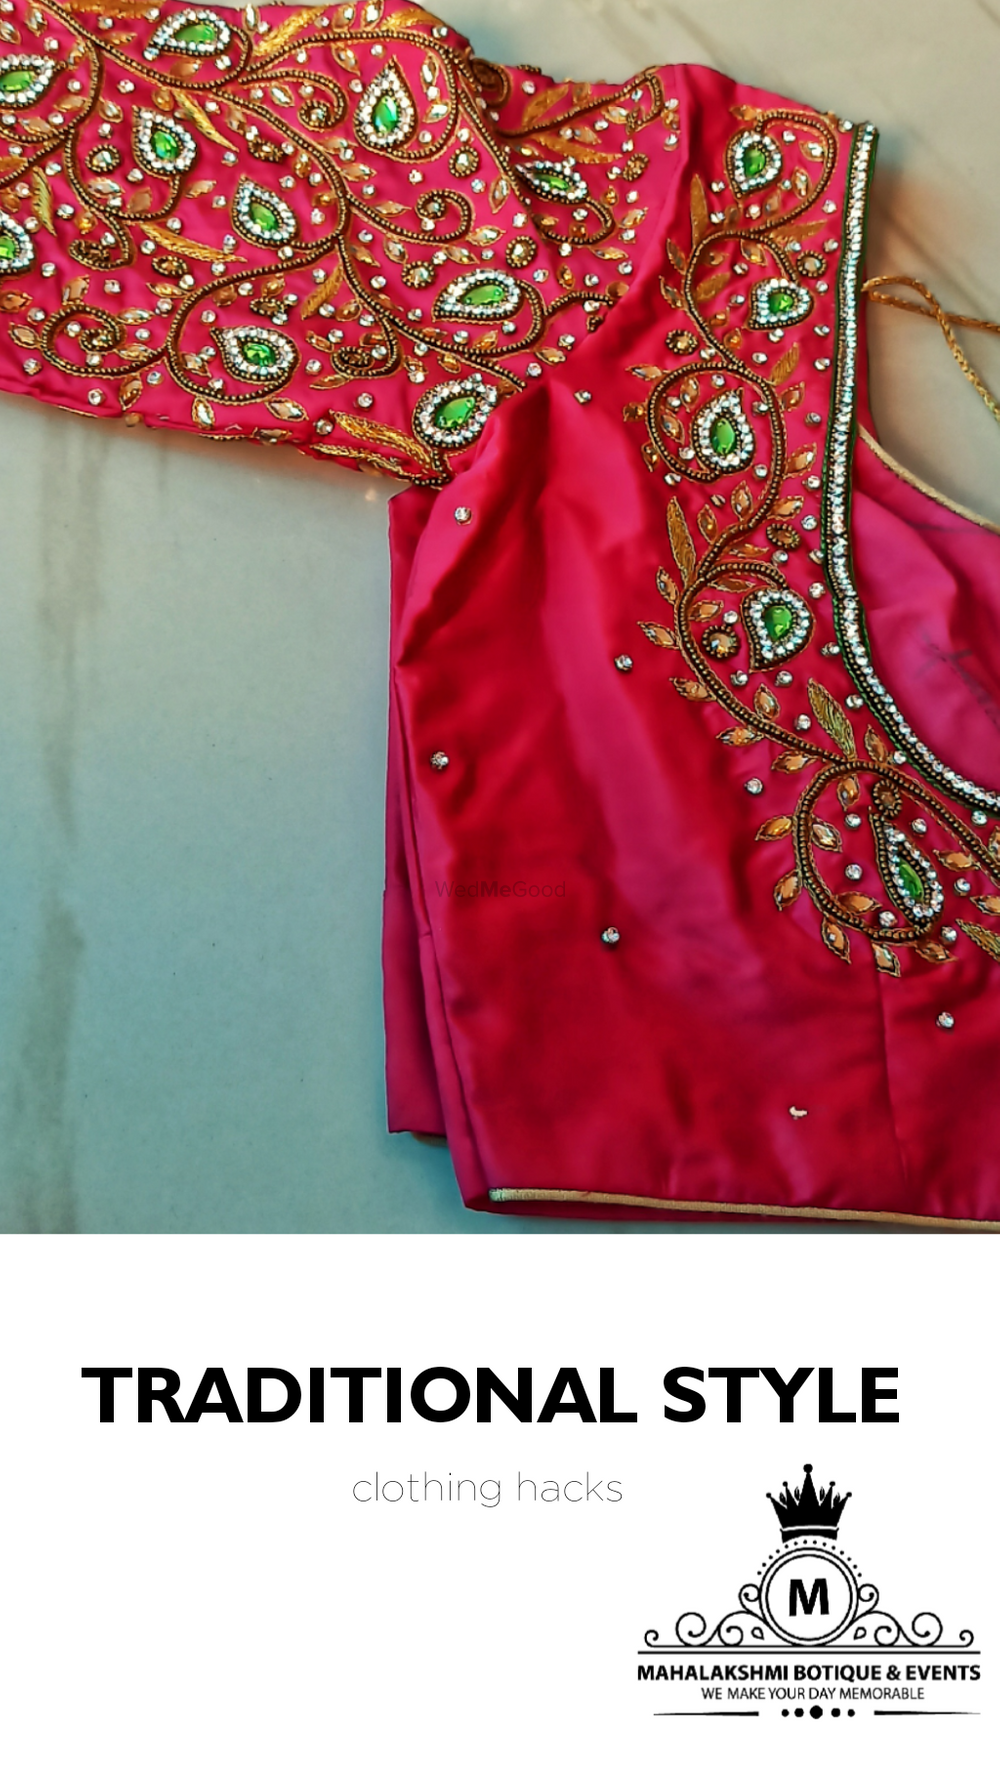 Photo From Trendy clothing - By Sri Mahalakshmi Boutique and Events